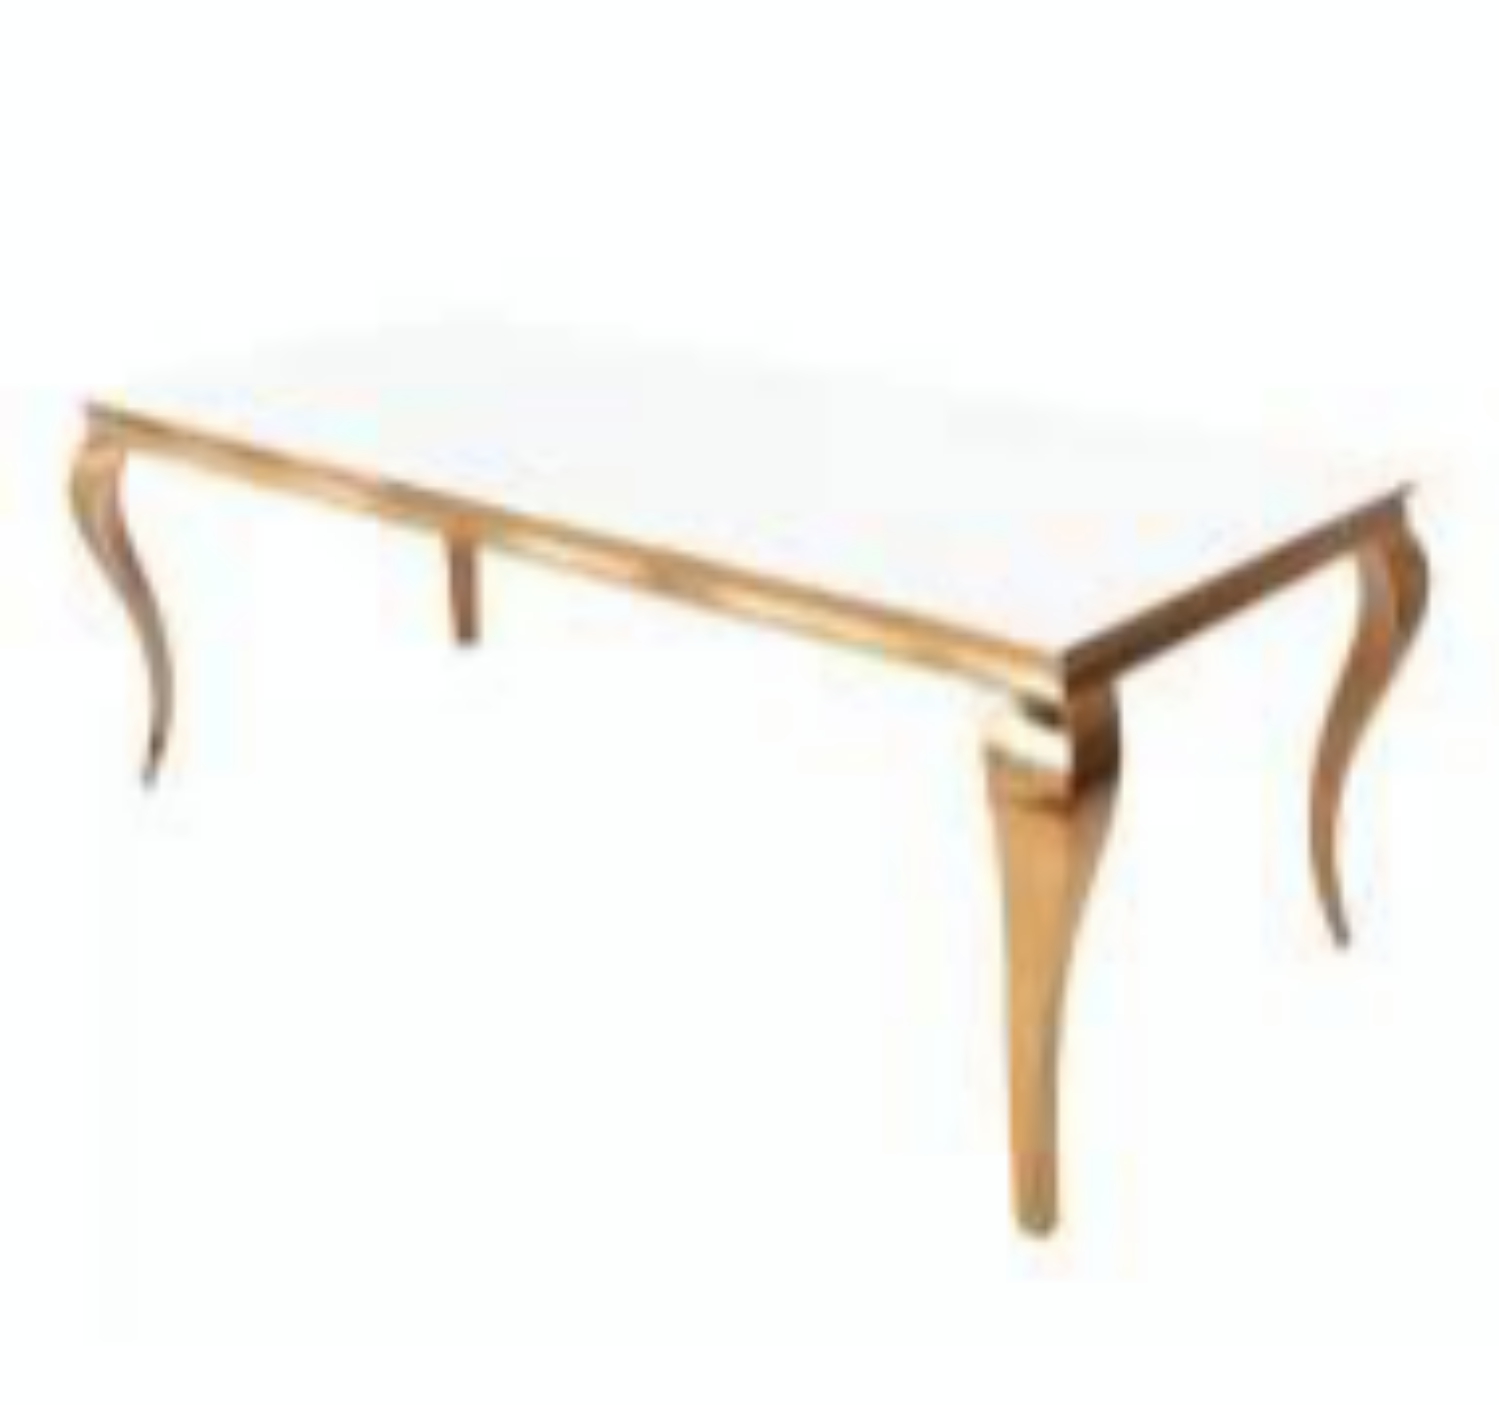 Gold table with white top for rent